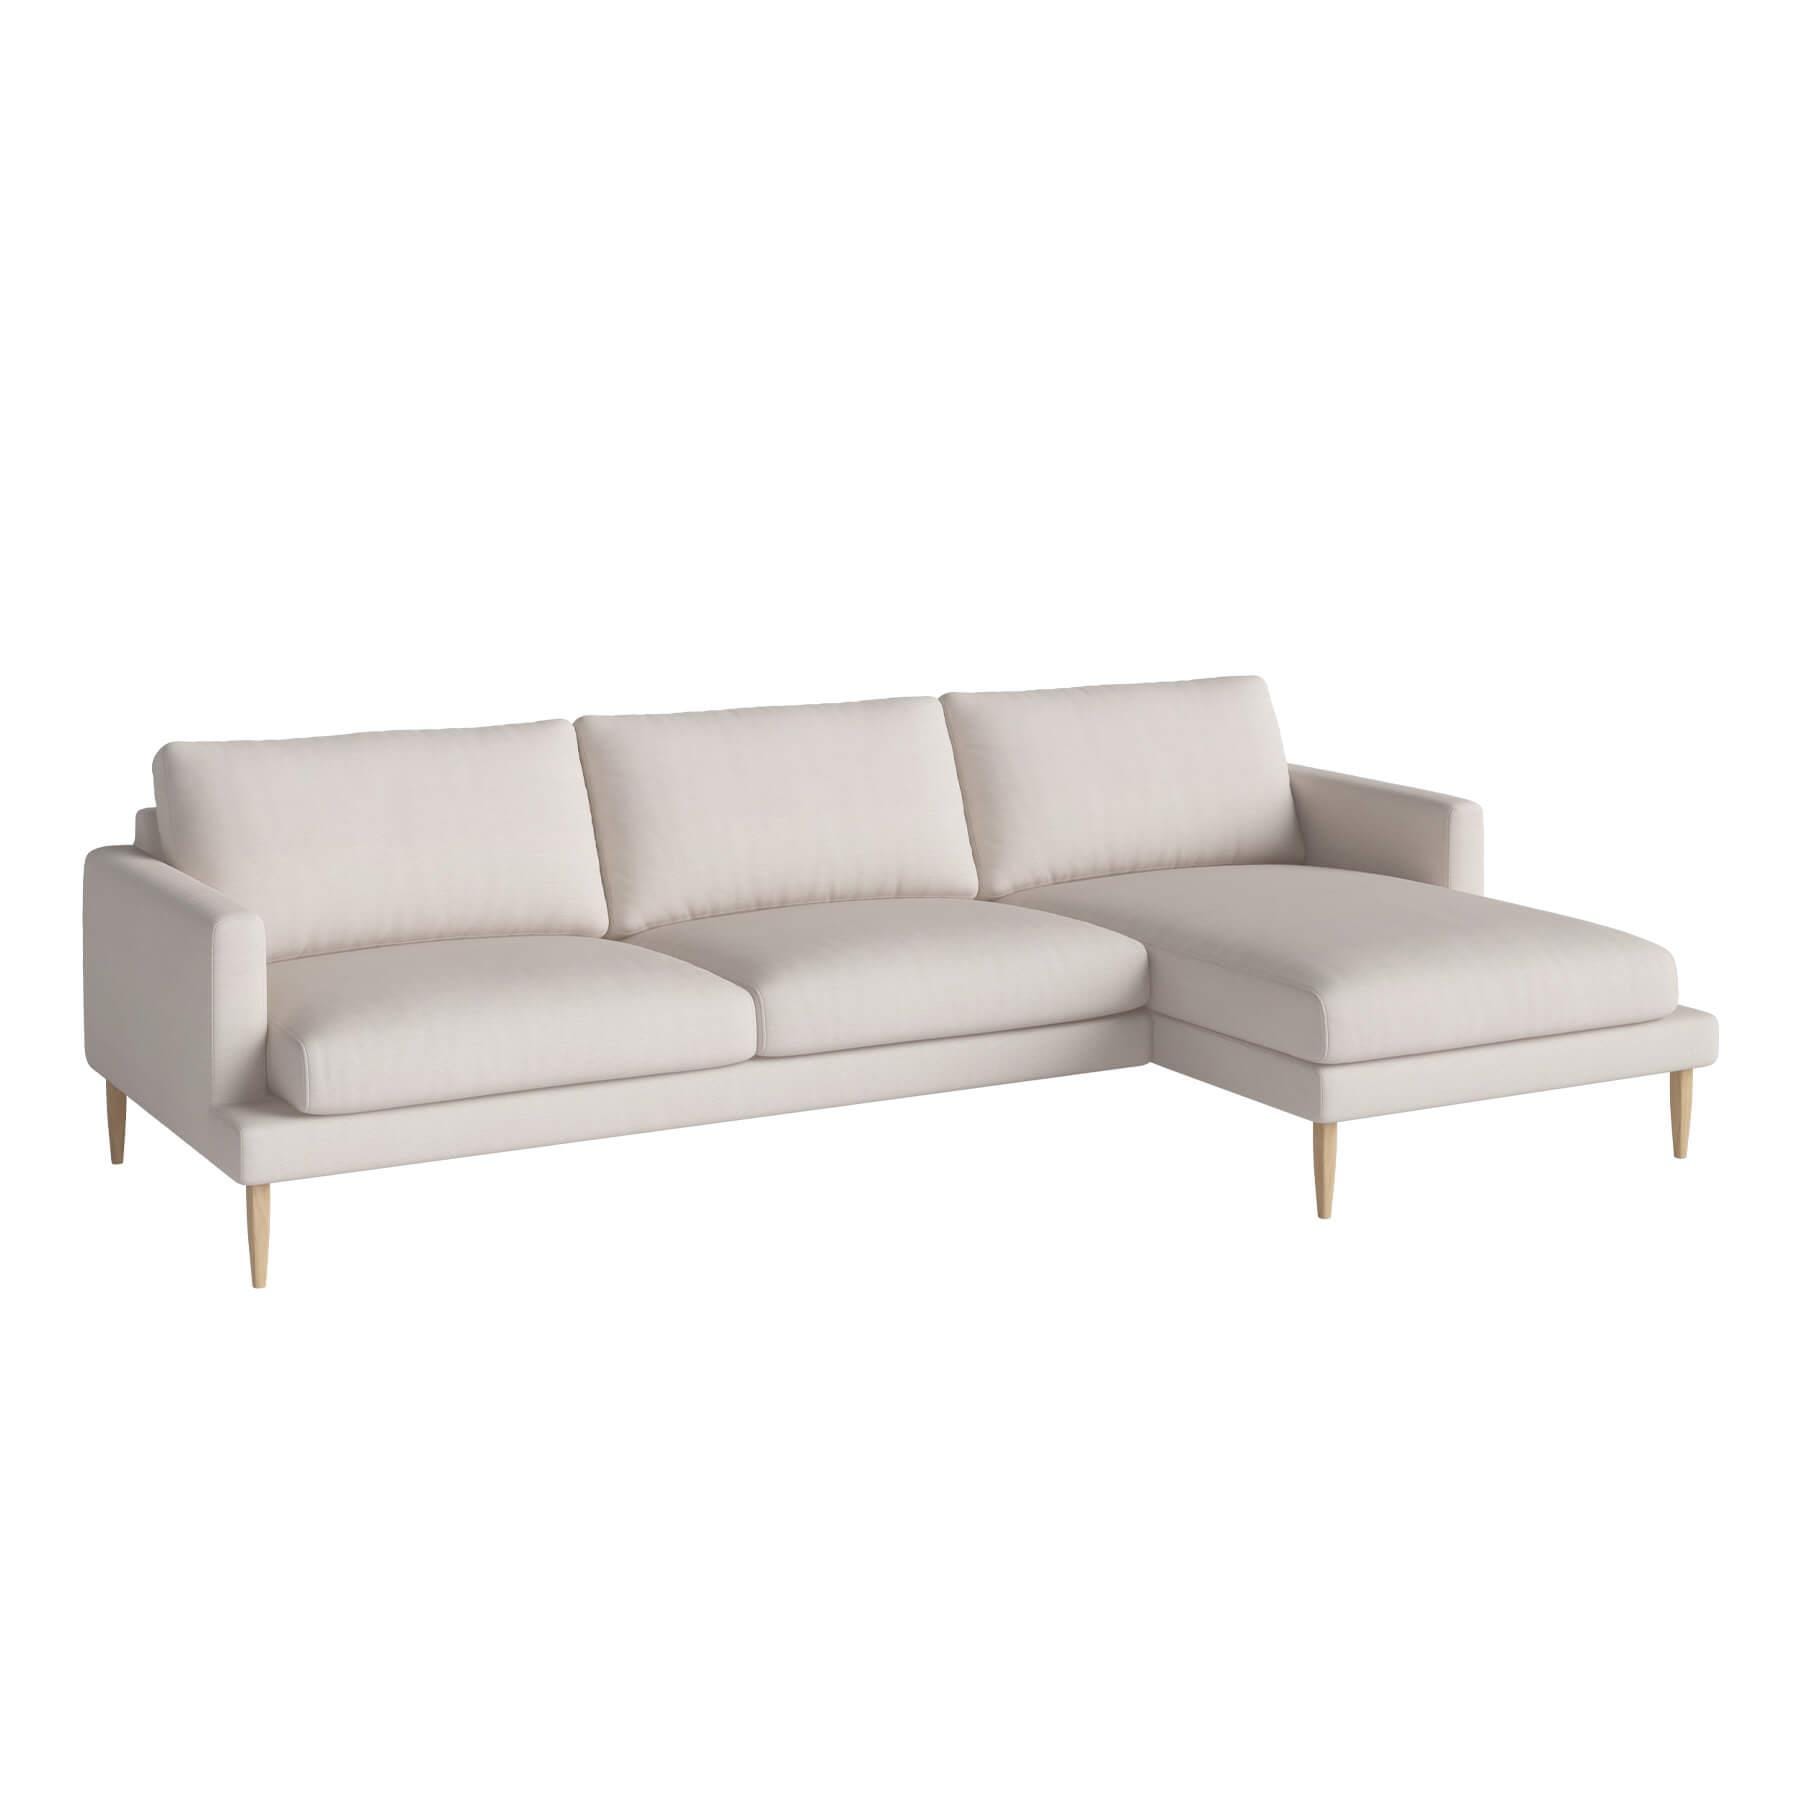 Bolia Veneda Sofa 35 Seater Sofa With Chaise Longue White Oiled Oak Linea Beige Right Brown Designer Furniture From Holloways Of Ludlow